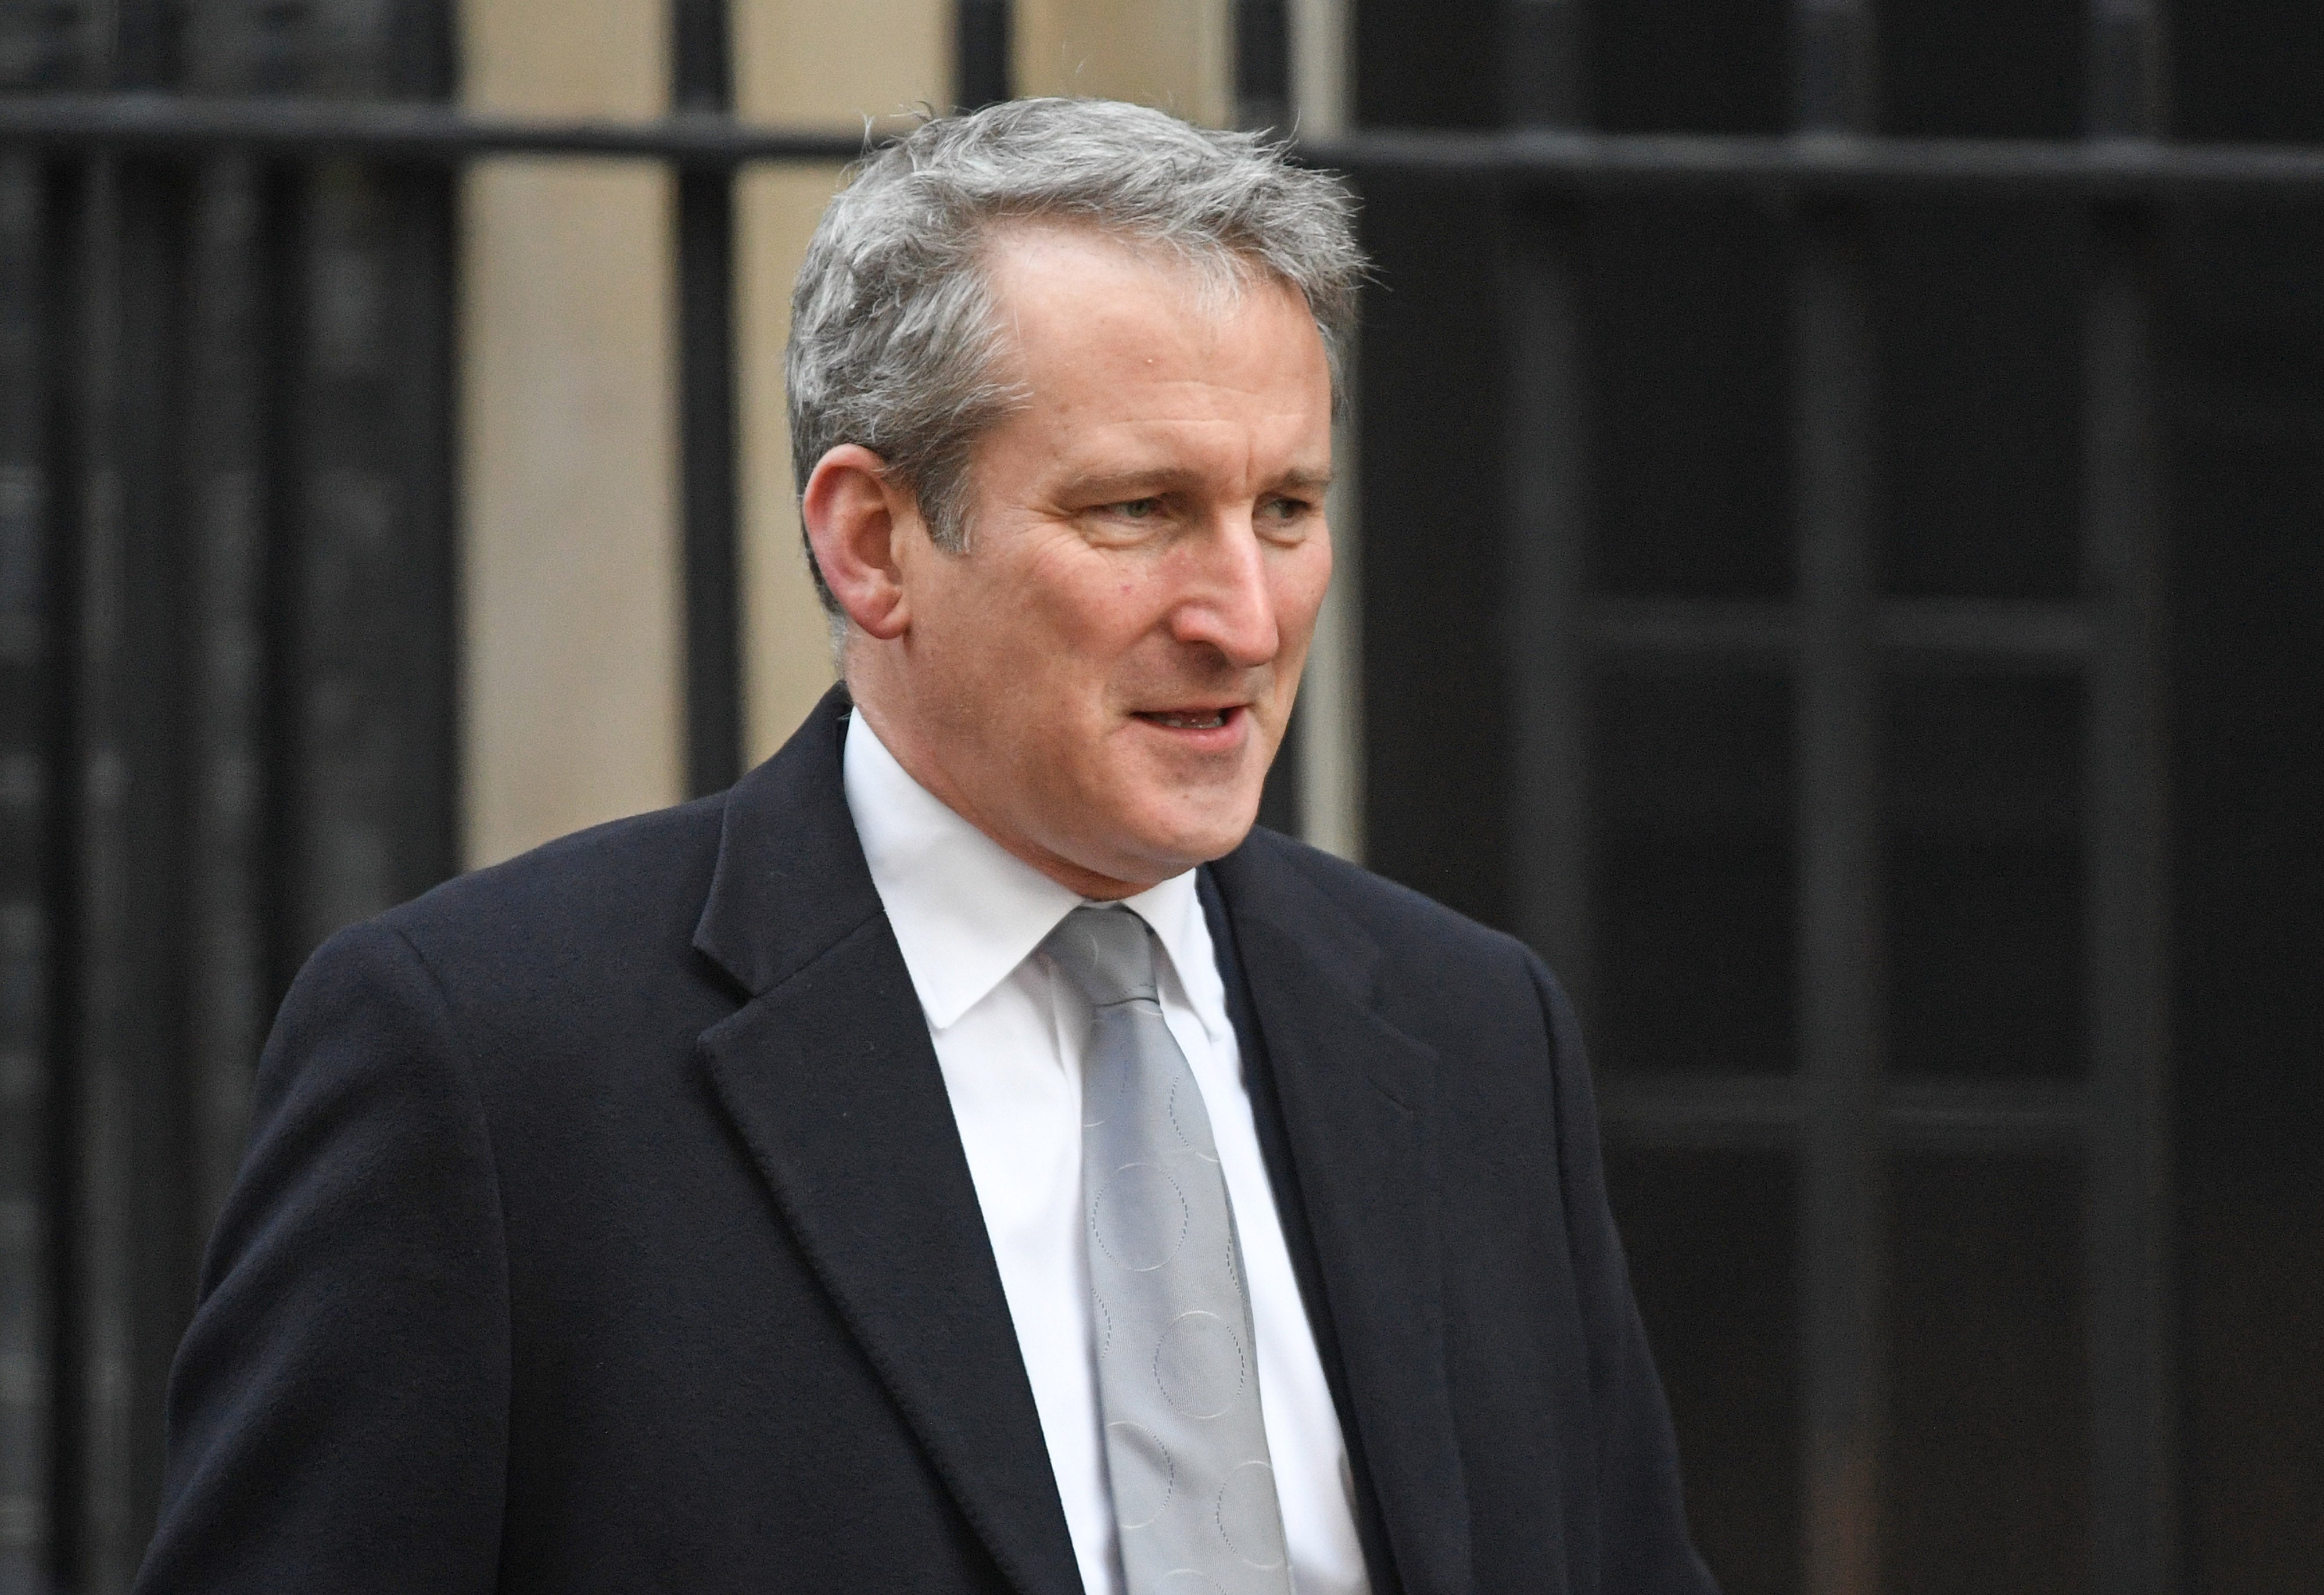 Home Office minister Damian Hinds said a ‘relatively small’ number of UK nationals and their Ukrainian families had begun applying for special visas (PA)